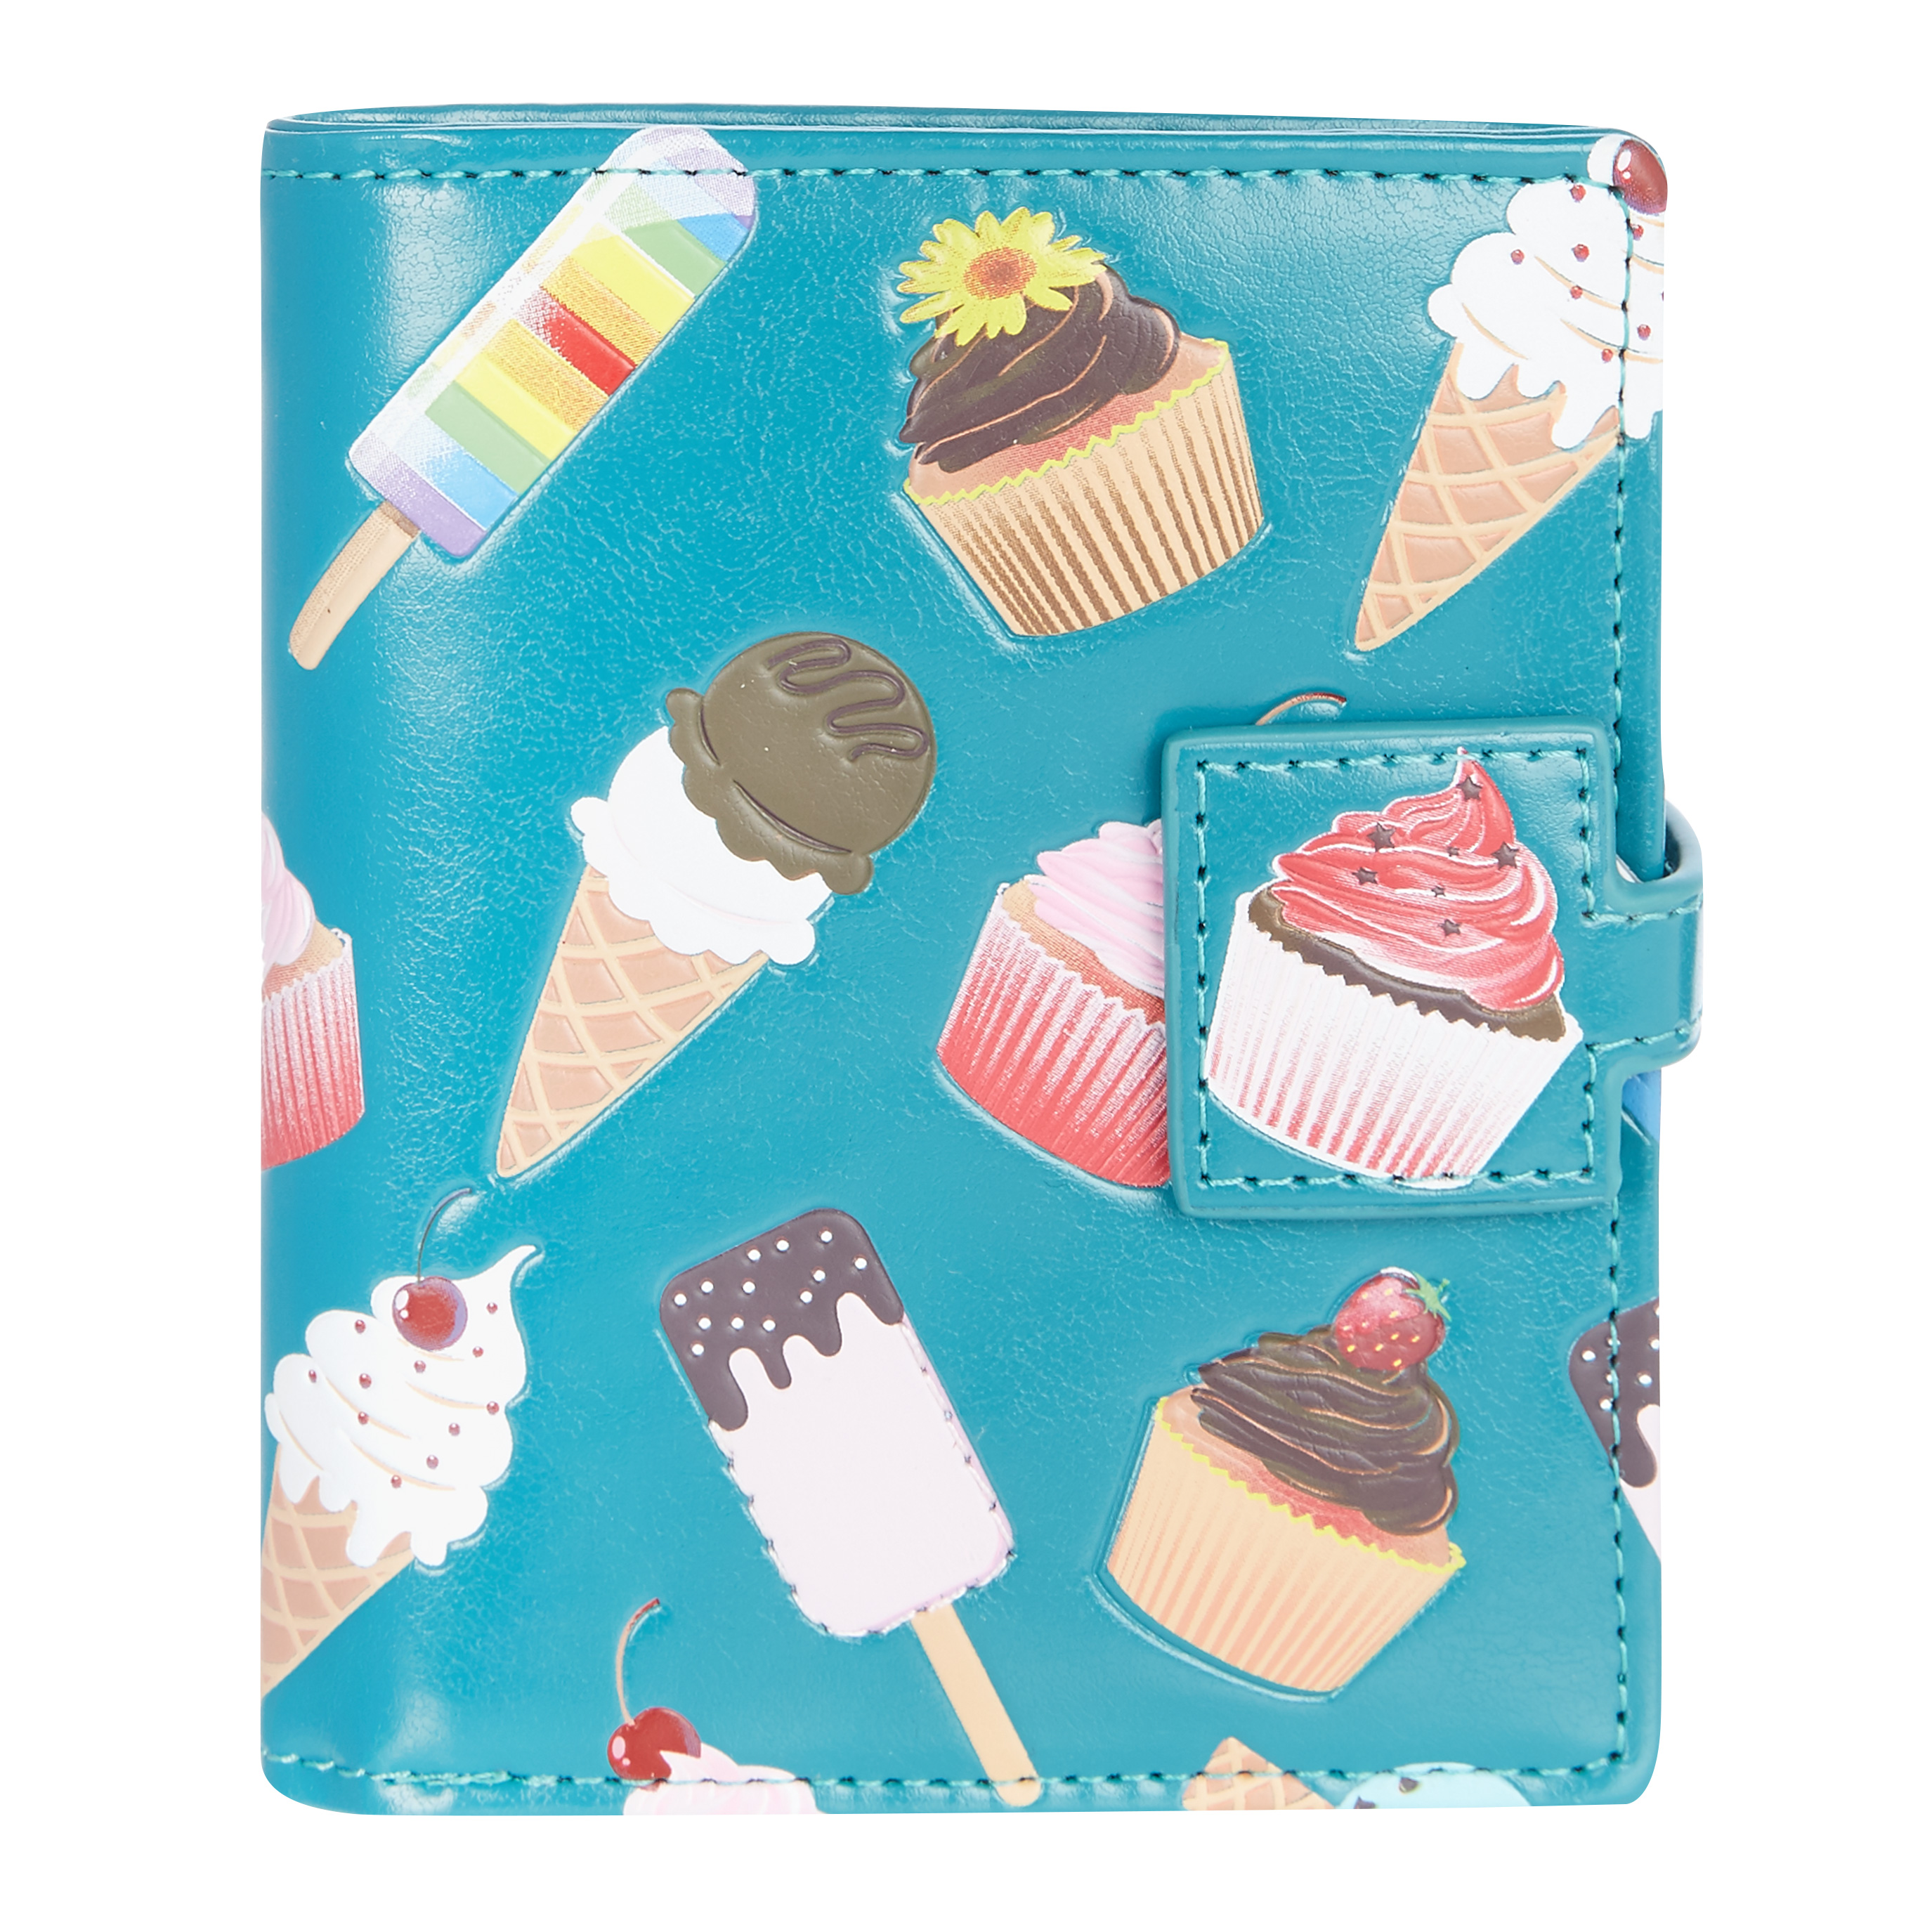 W009817sm-cup-cake-and-ice-cream_frt_02